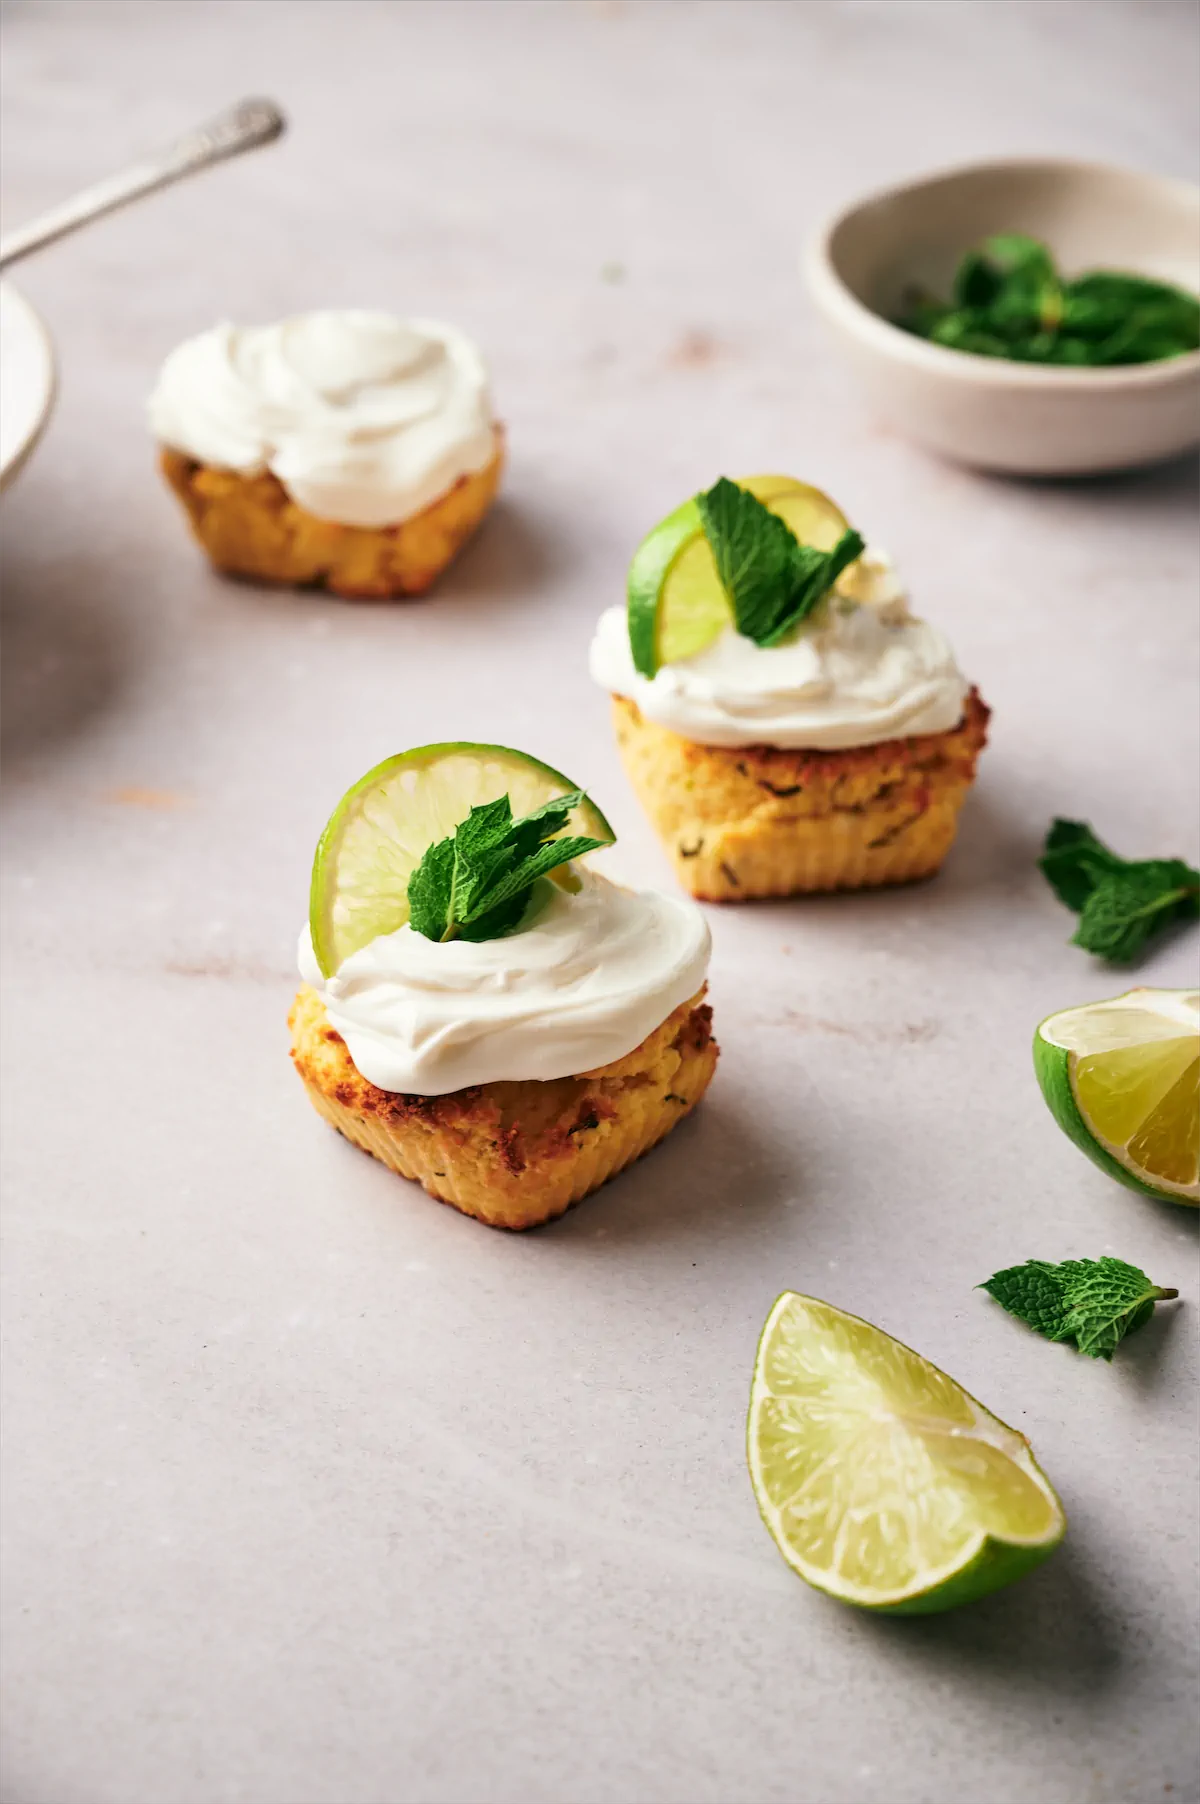 Sugar-free keto mojito cupcakes topped with cream cheese frosting and two are garnished with a lemon wedge and mint leaves.